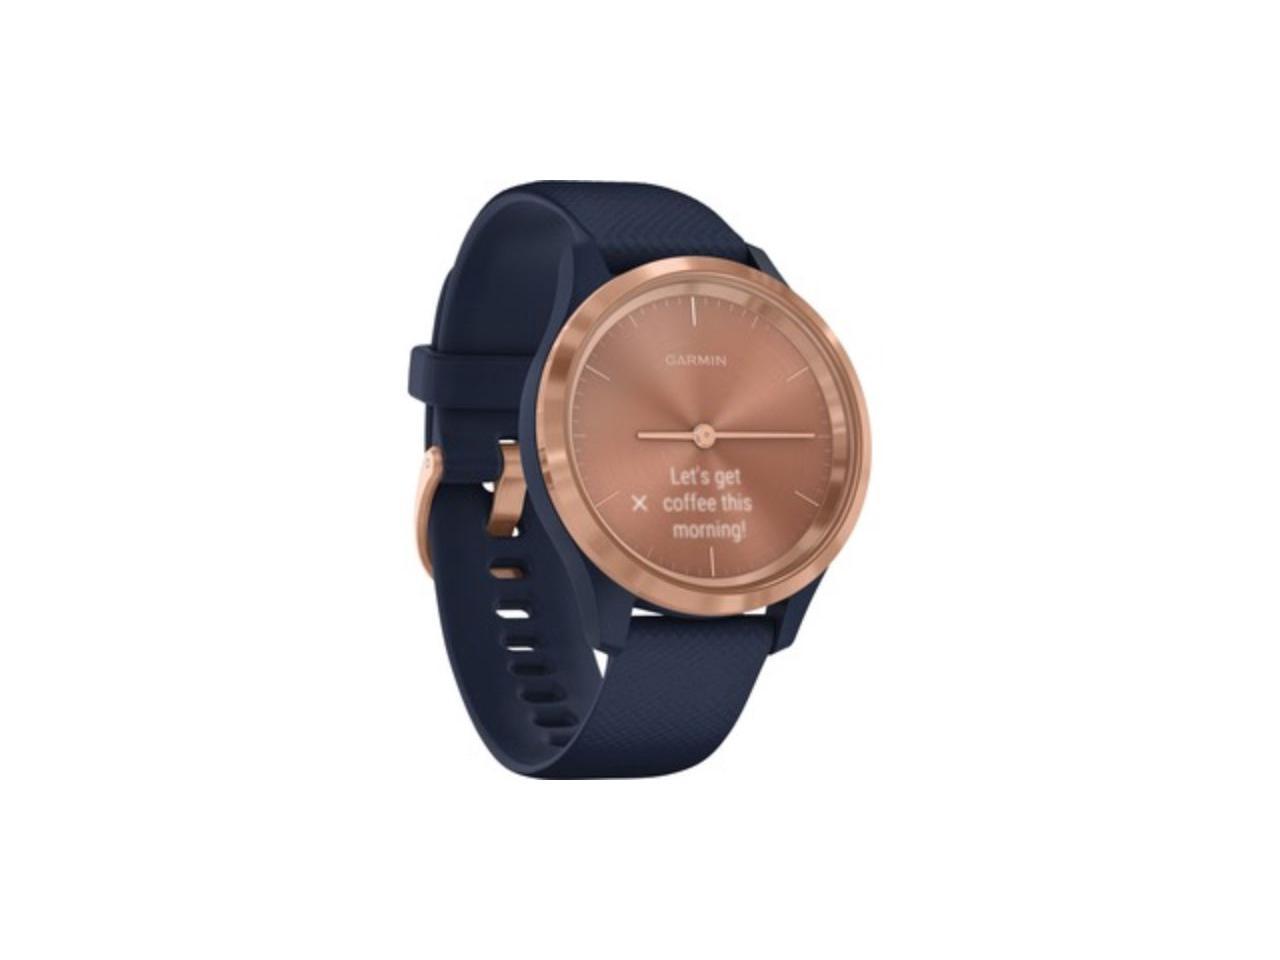 Garmin Vivomove 3S Hybrid Smartwatch with Real Watch Hands and Hidden Touchscreen Display - Navy Silicone with Rose Gold Hardware